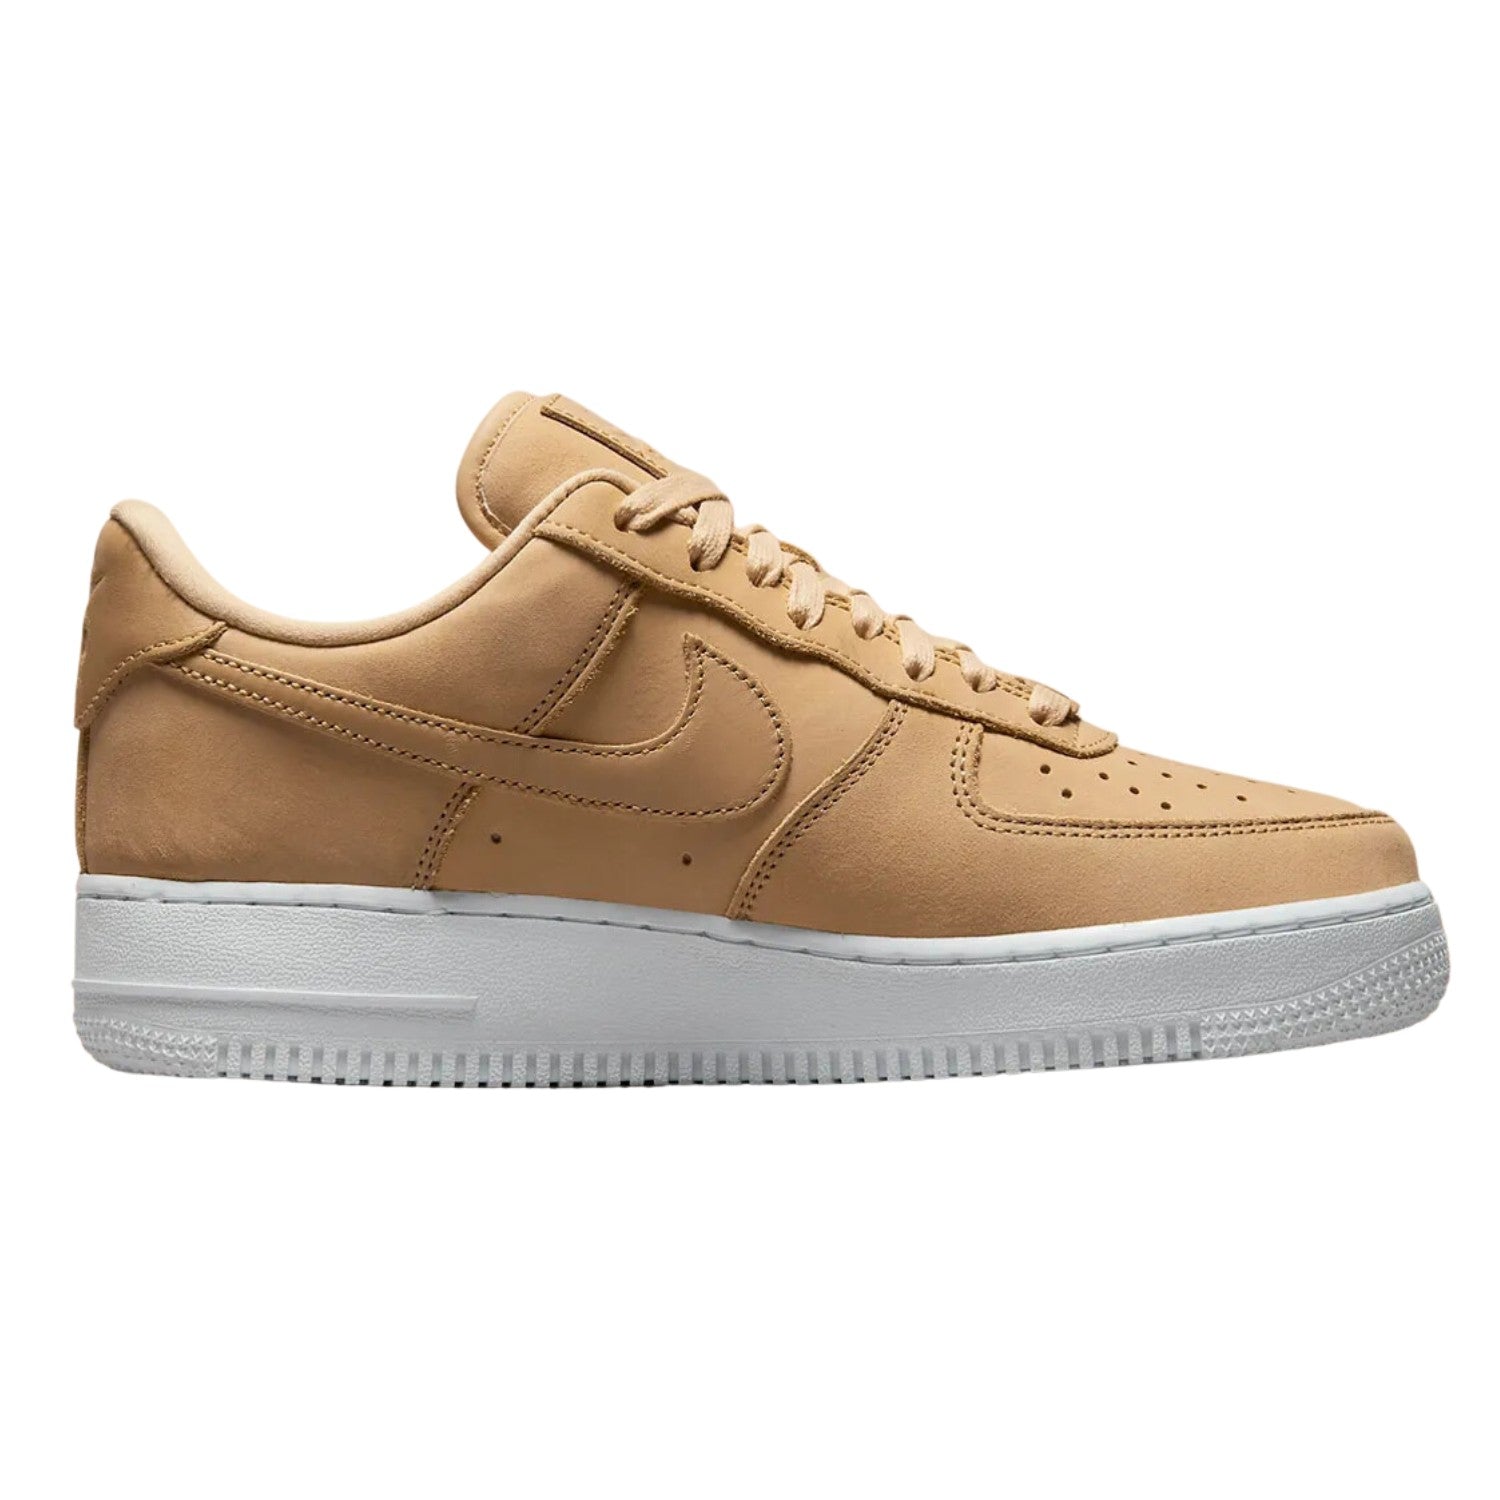 Nike Air Force 1 Prm Mf Womens Style : Dr9503